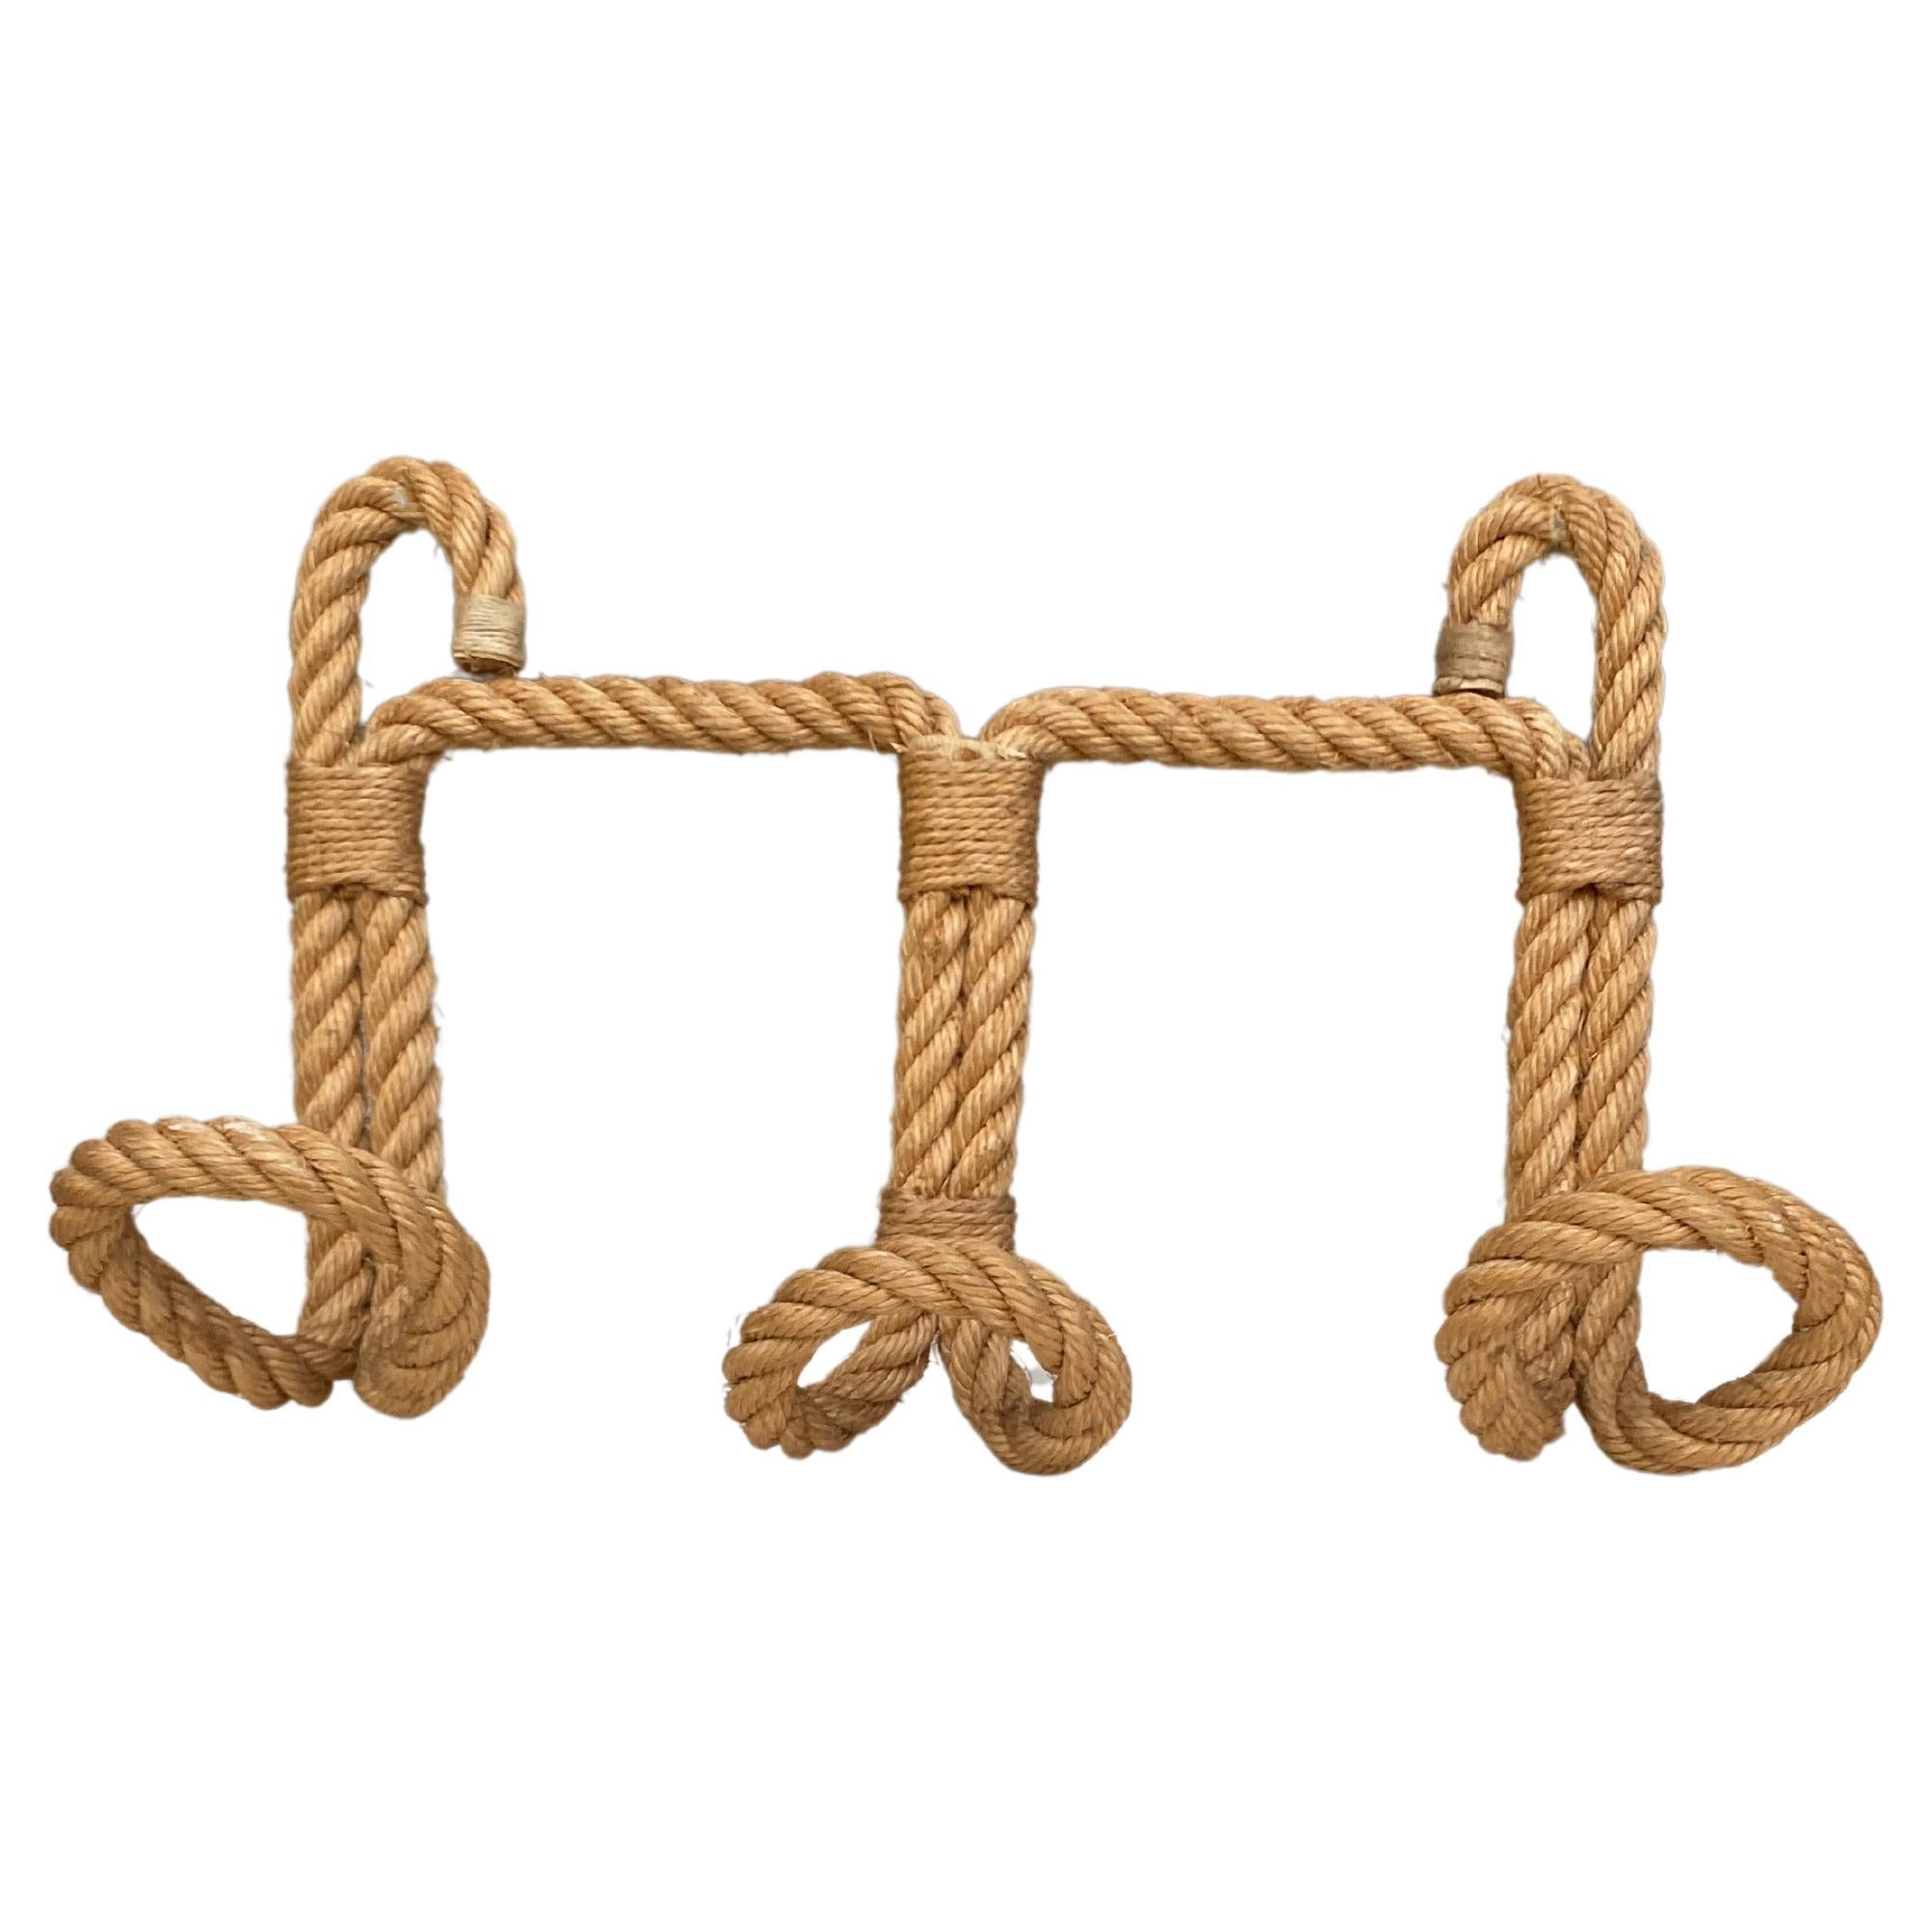 Pair of Mid-Century Rope Coat Rack Adrien Audoux & Frida Minet In Good Condition For Sale In Austin, TX